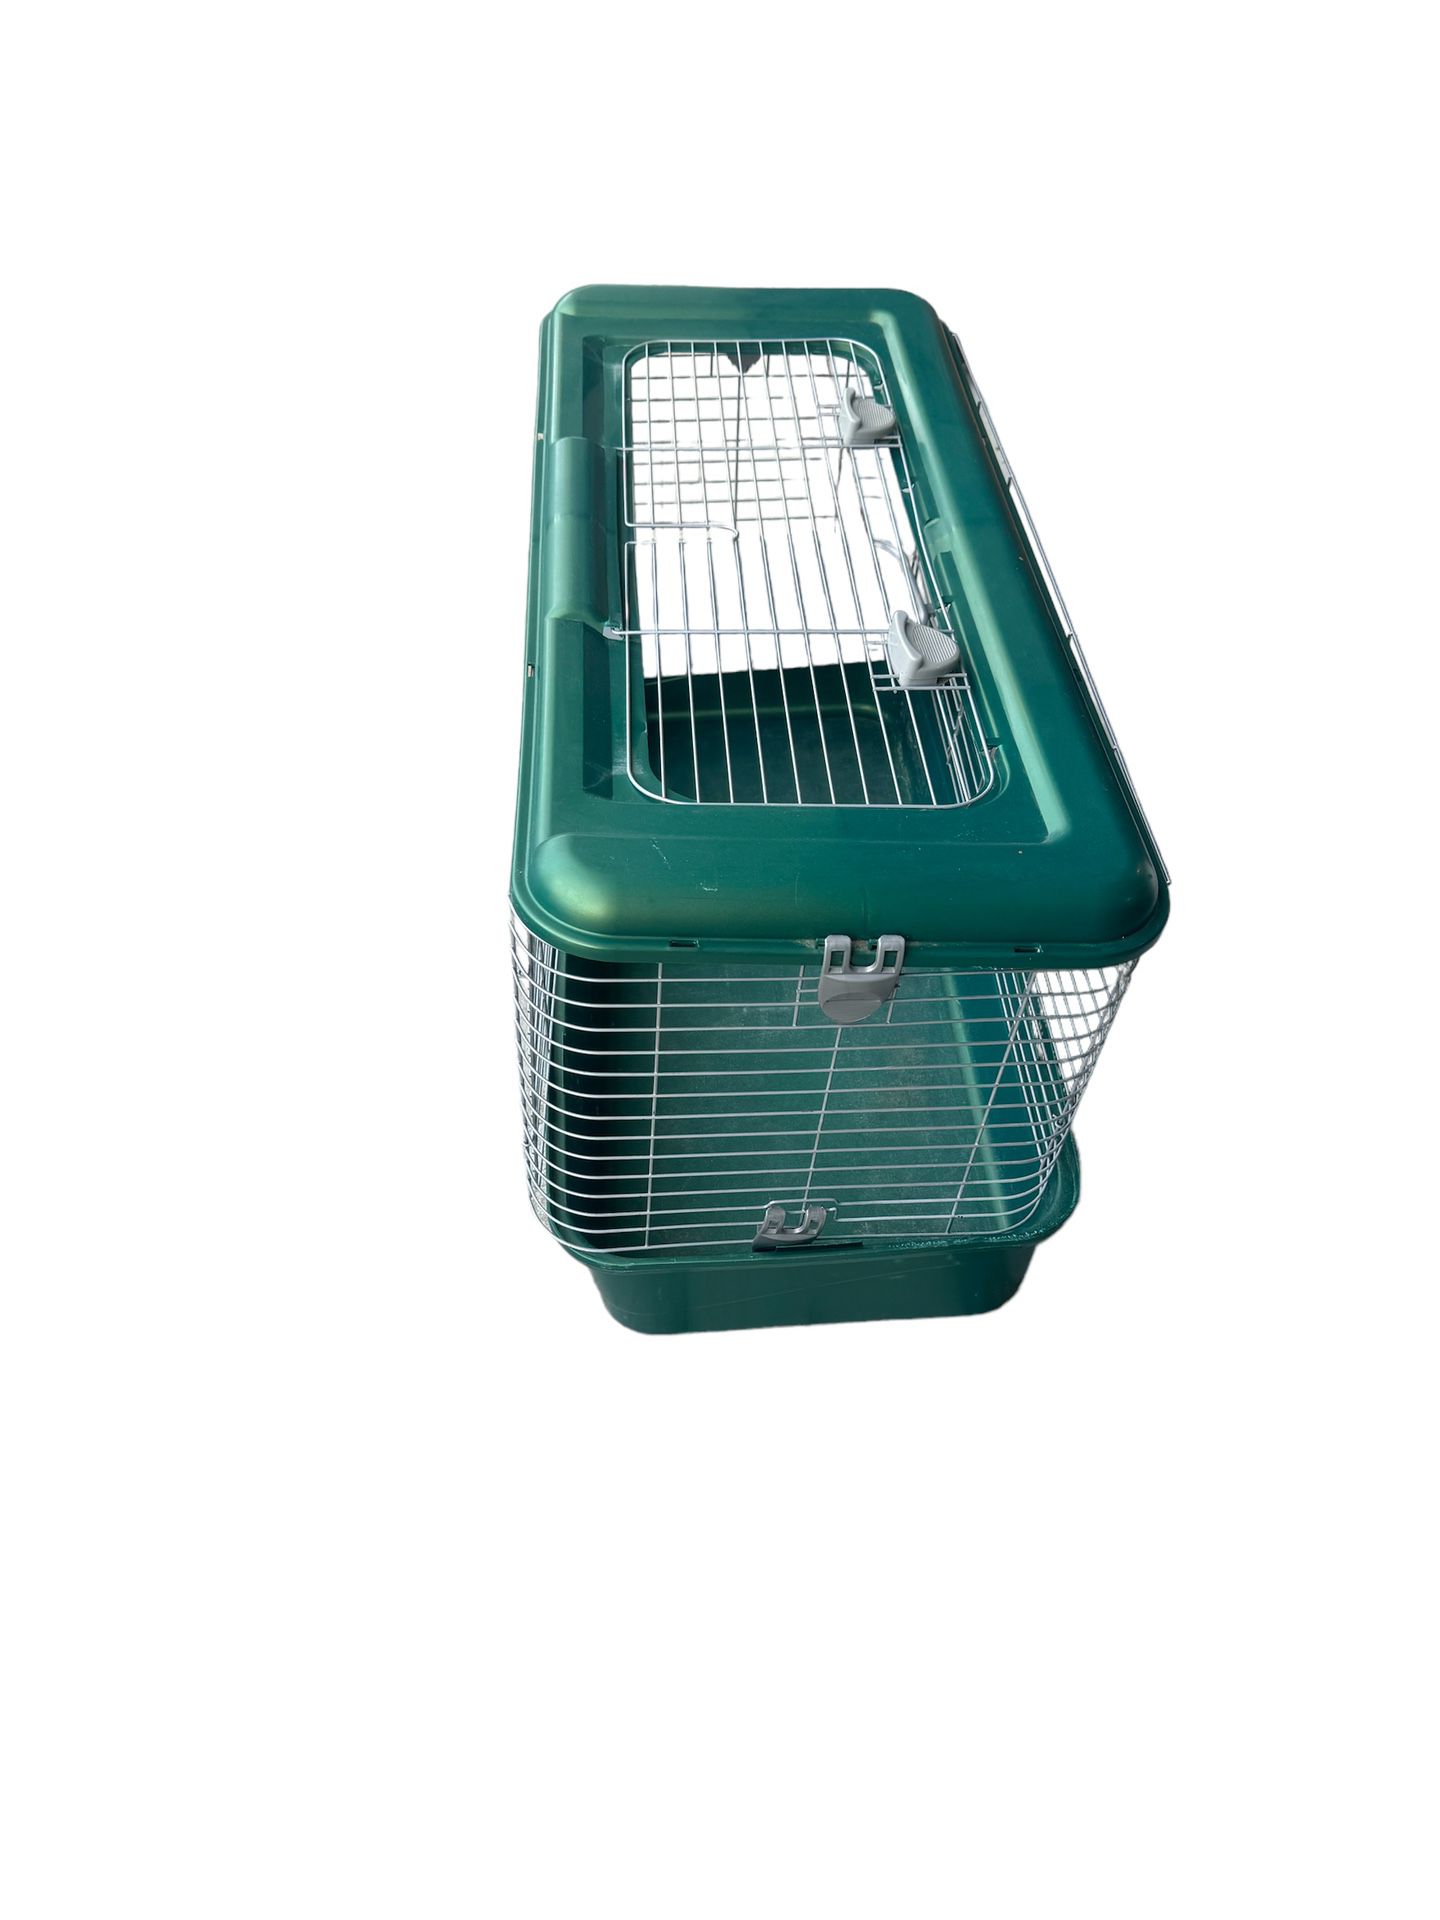 Kaytee My First Home 2-Level Small Pet Habitat, Green Large